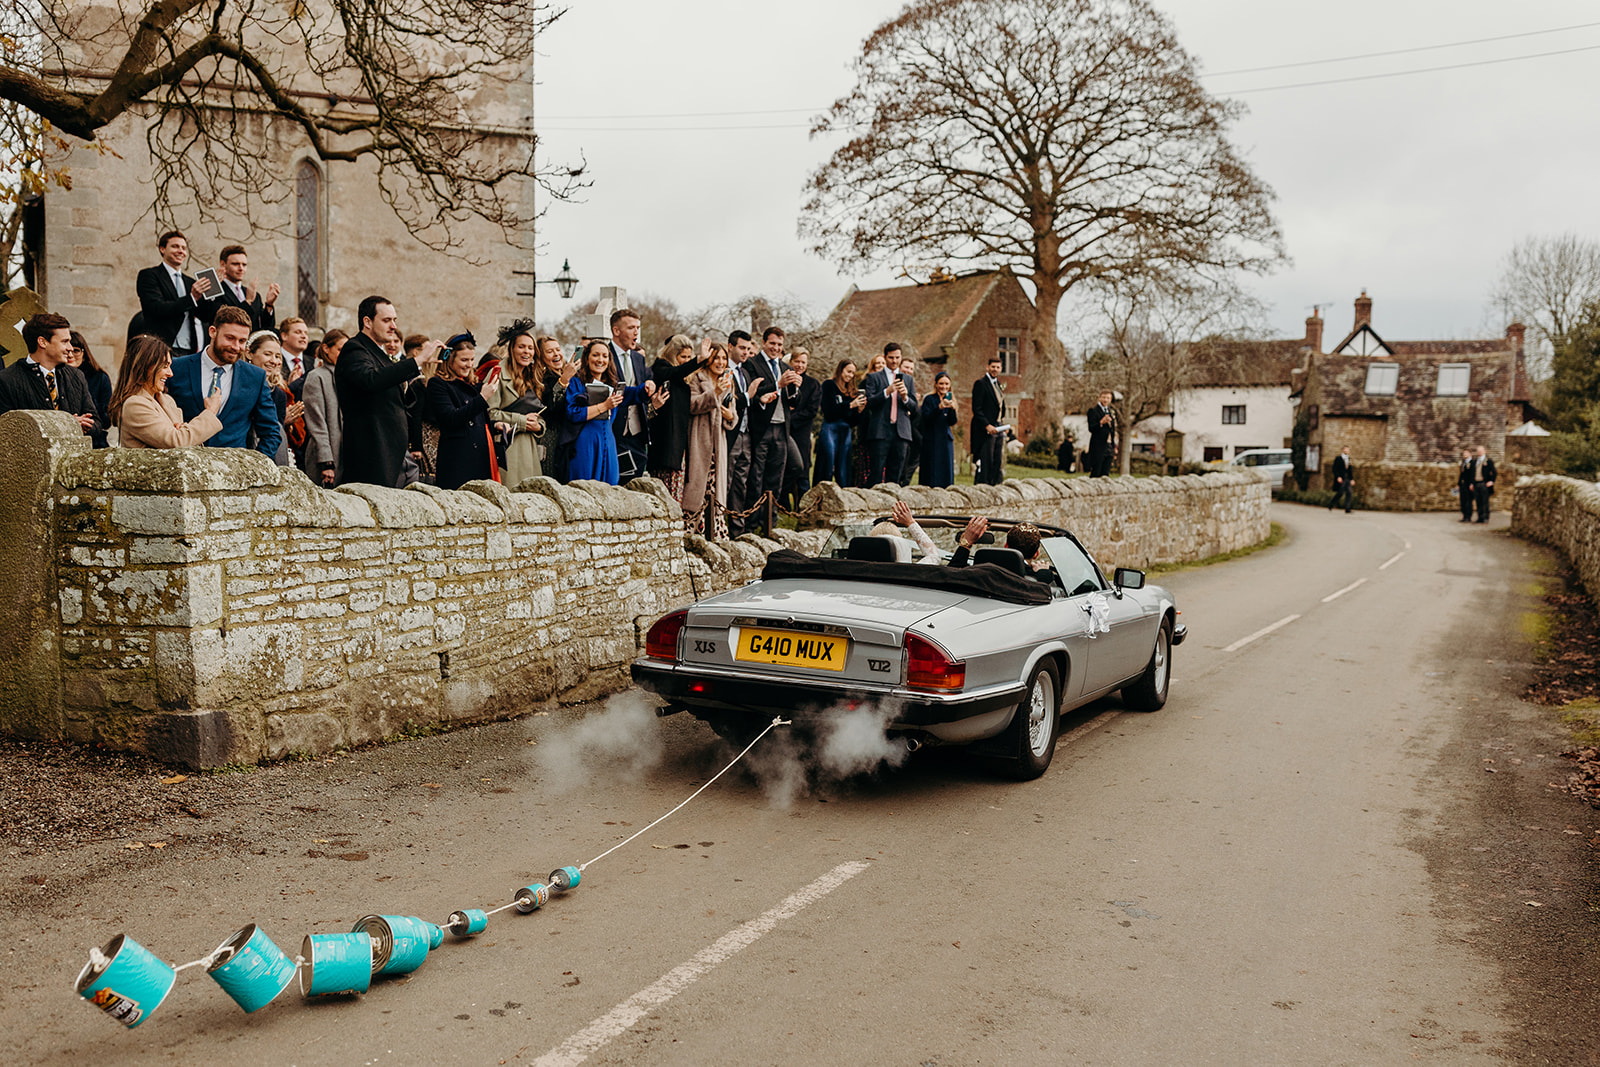 bride and groom leaving in vintage car with cans tailing behind as guests wave them on